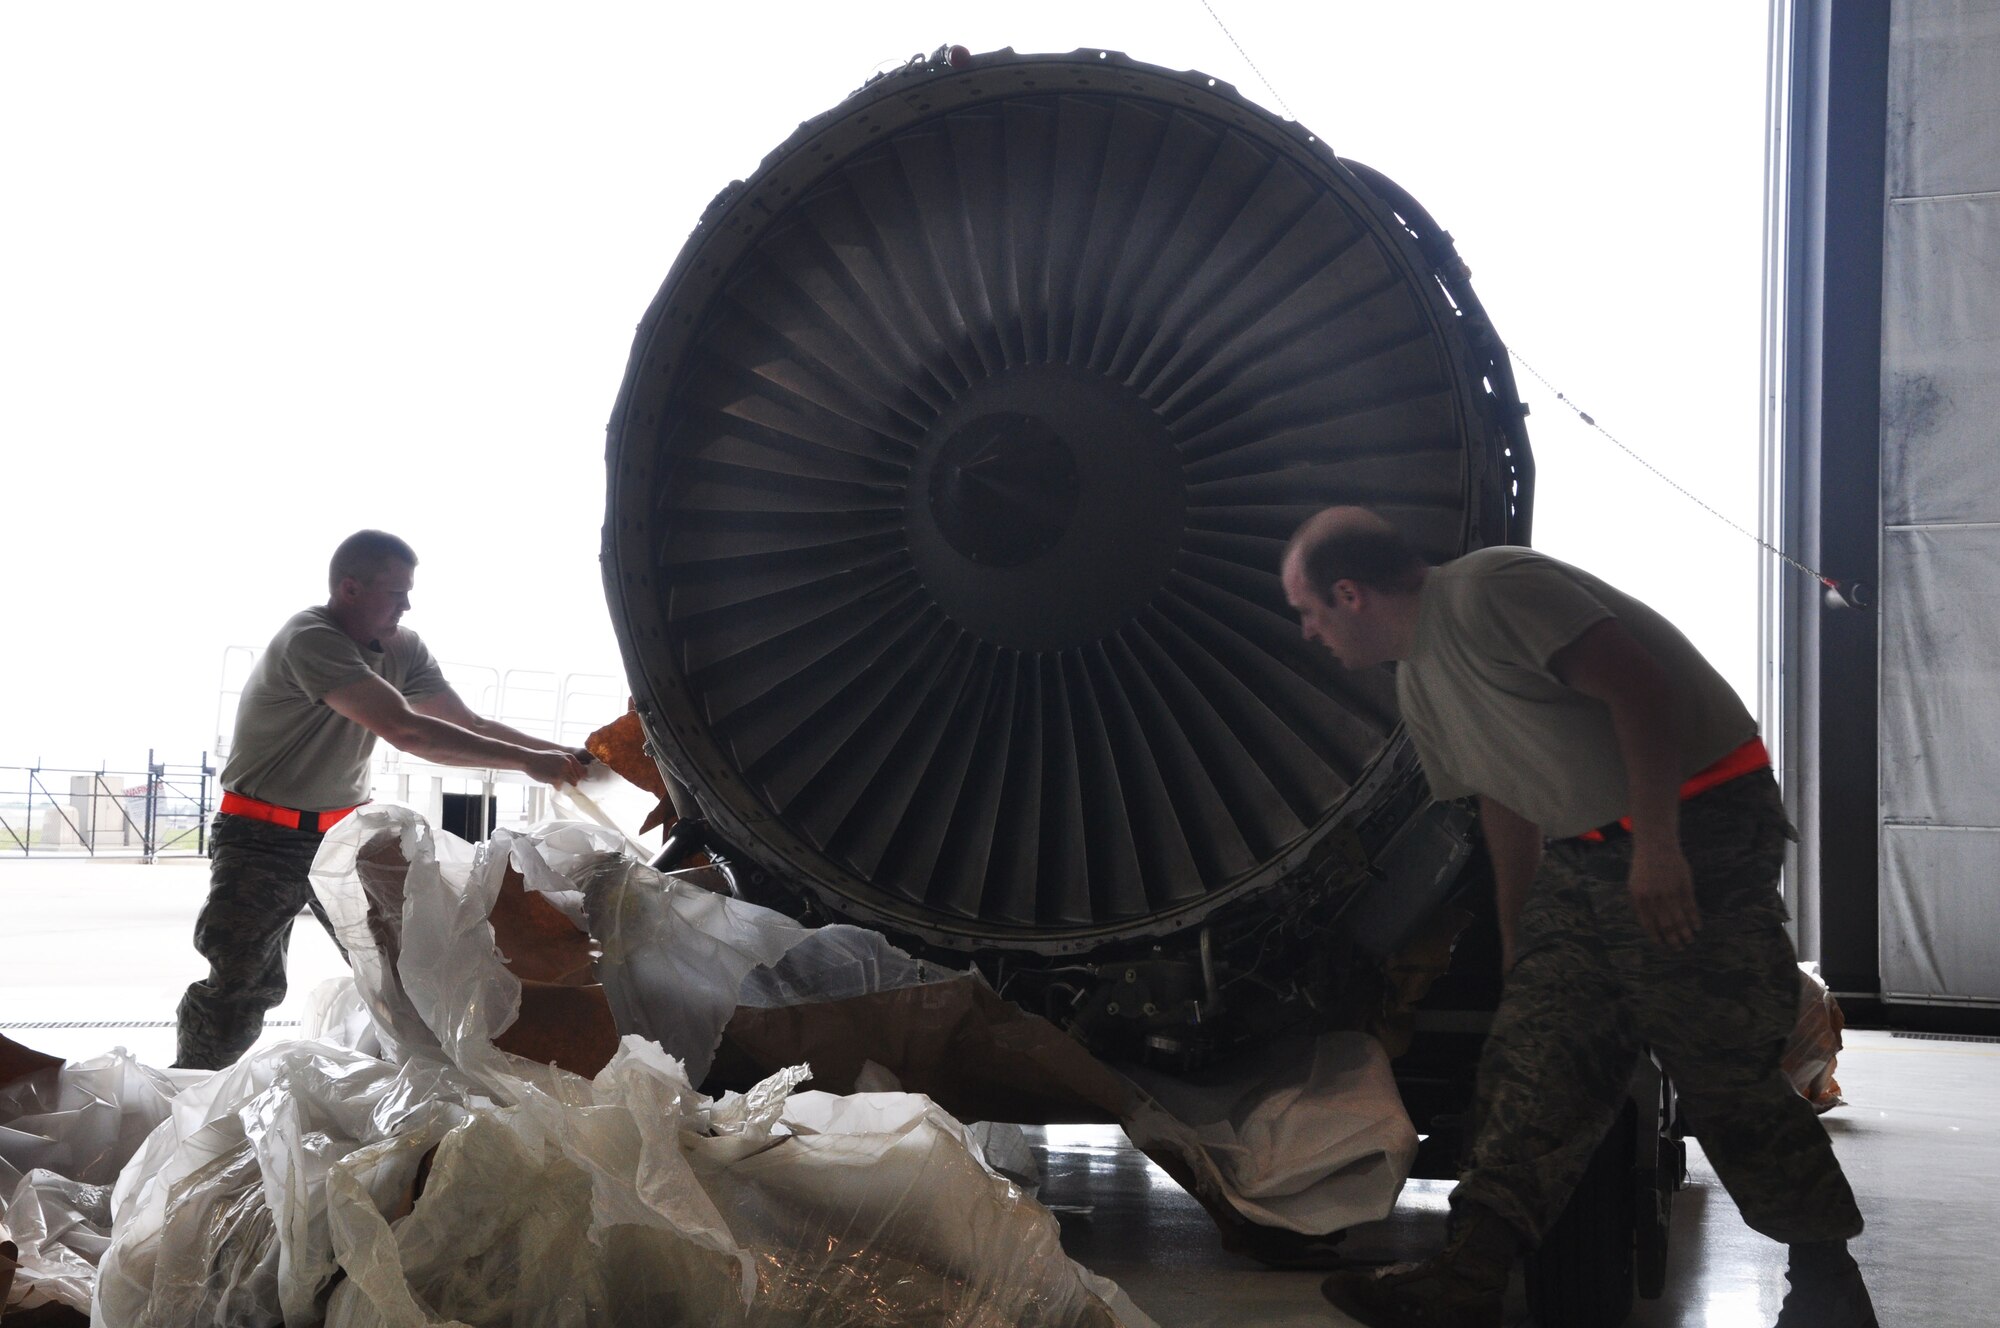 Members of the 931st Maintenance Squadron unwrap a KC-135 Stratotanker F108 engine during a unit training assembly at McConnell Air Force Base, Kan., April 11, 2015. With more than 60 Stratotankers assigned, McConnell operates and maintains the Air Force's largest air refueling fleet, conducting worldwide military operations. (U.S. Air Force photo by Tech. Sgt. Abigail Klein)
